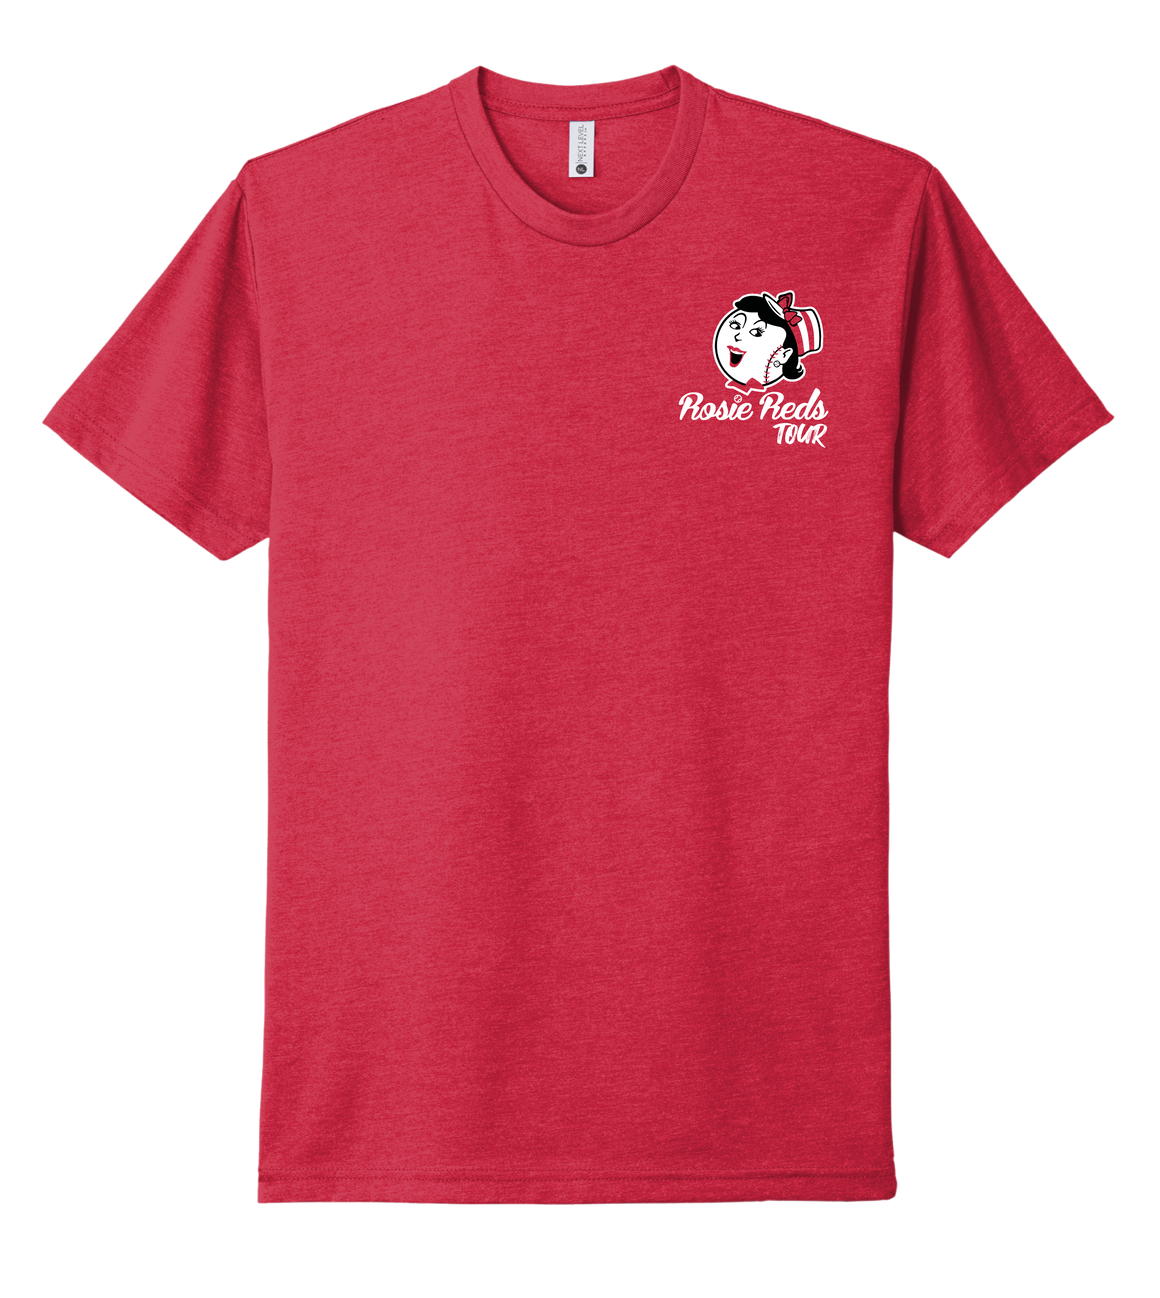 Rosie Reds Tour 2023 T-shirt front Cincy Shirts